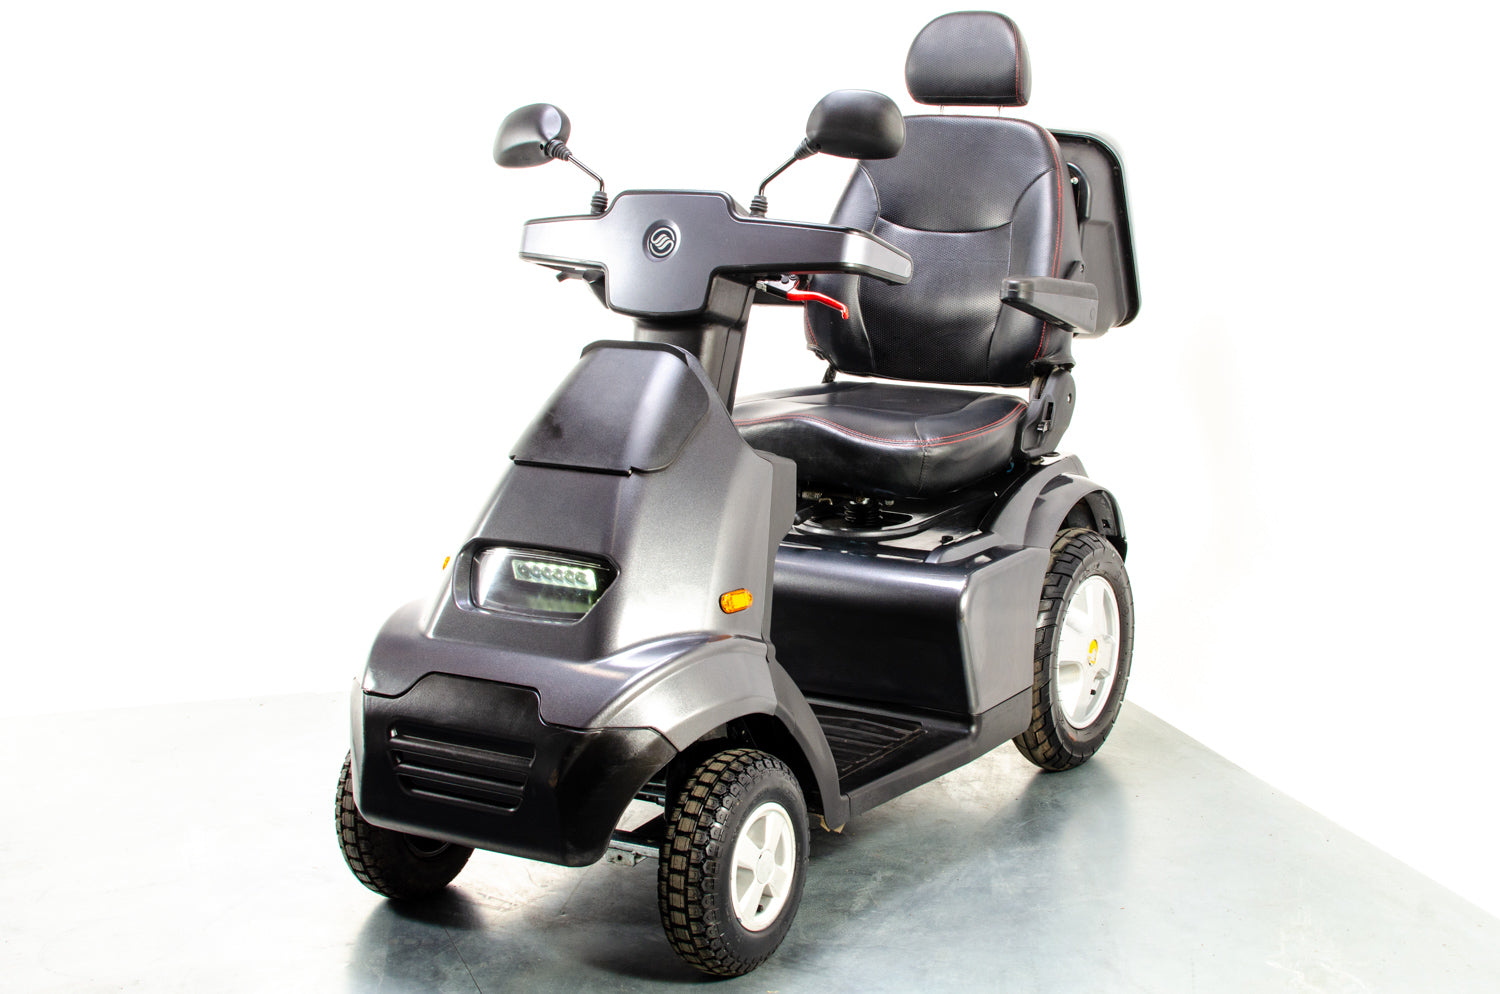 TGA Breeze S4 Used Mobility Scooter 2020 Facelift 8mph Large Road Legal All-Terrain Off-Road